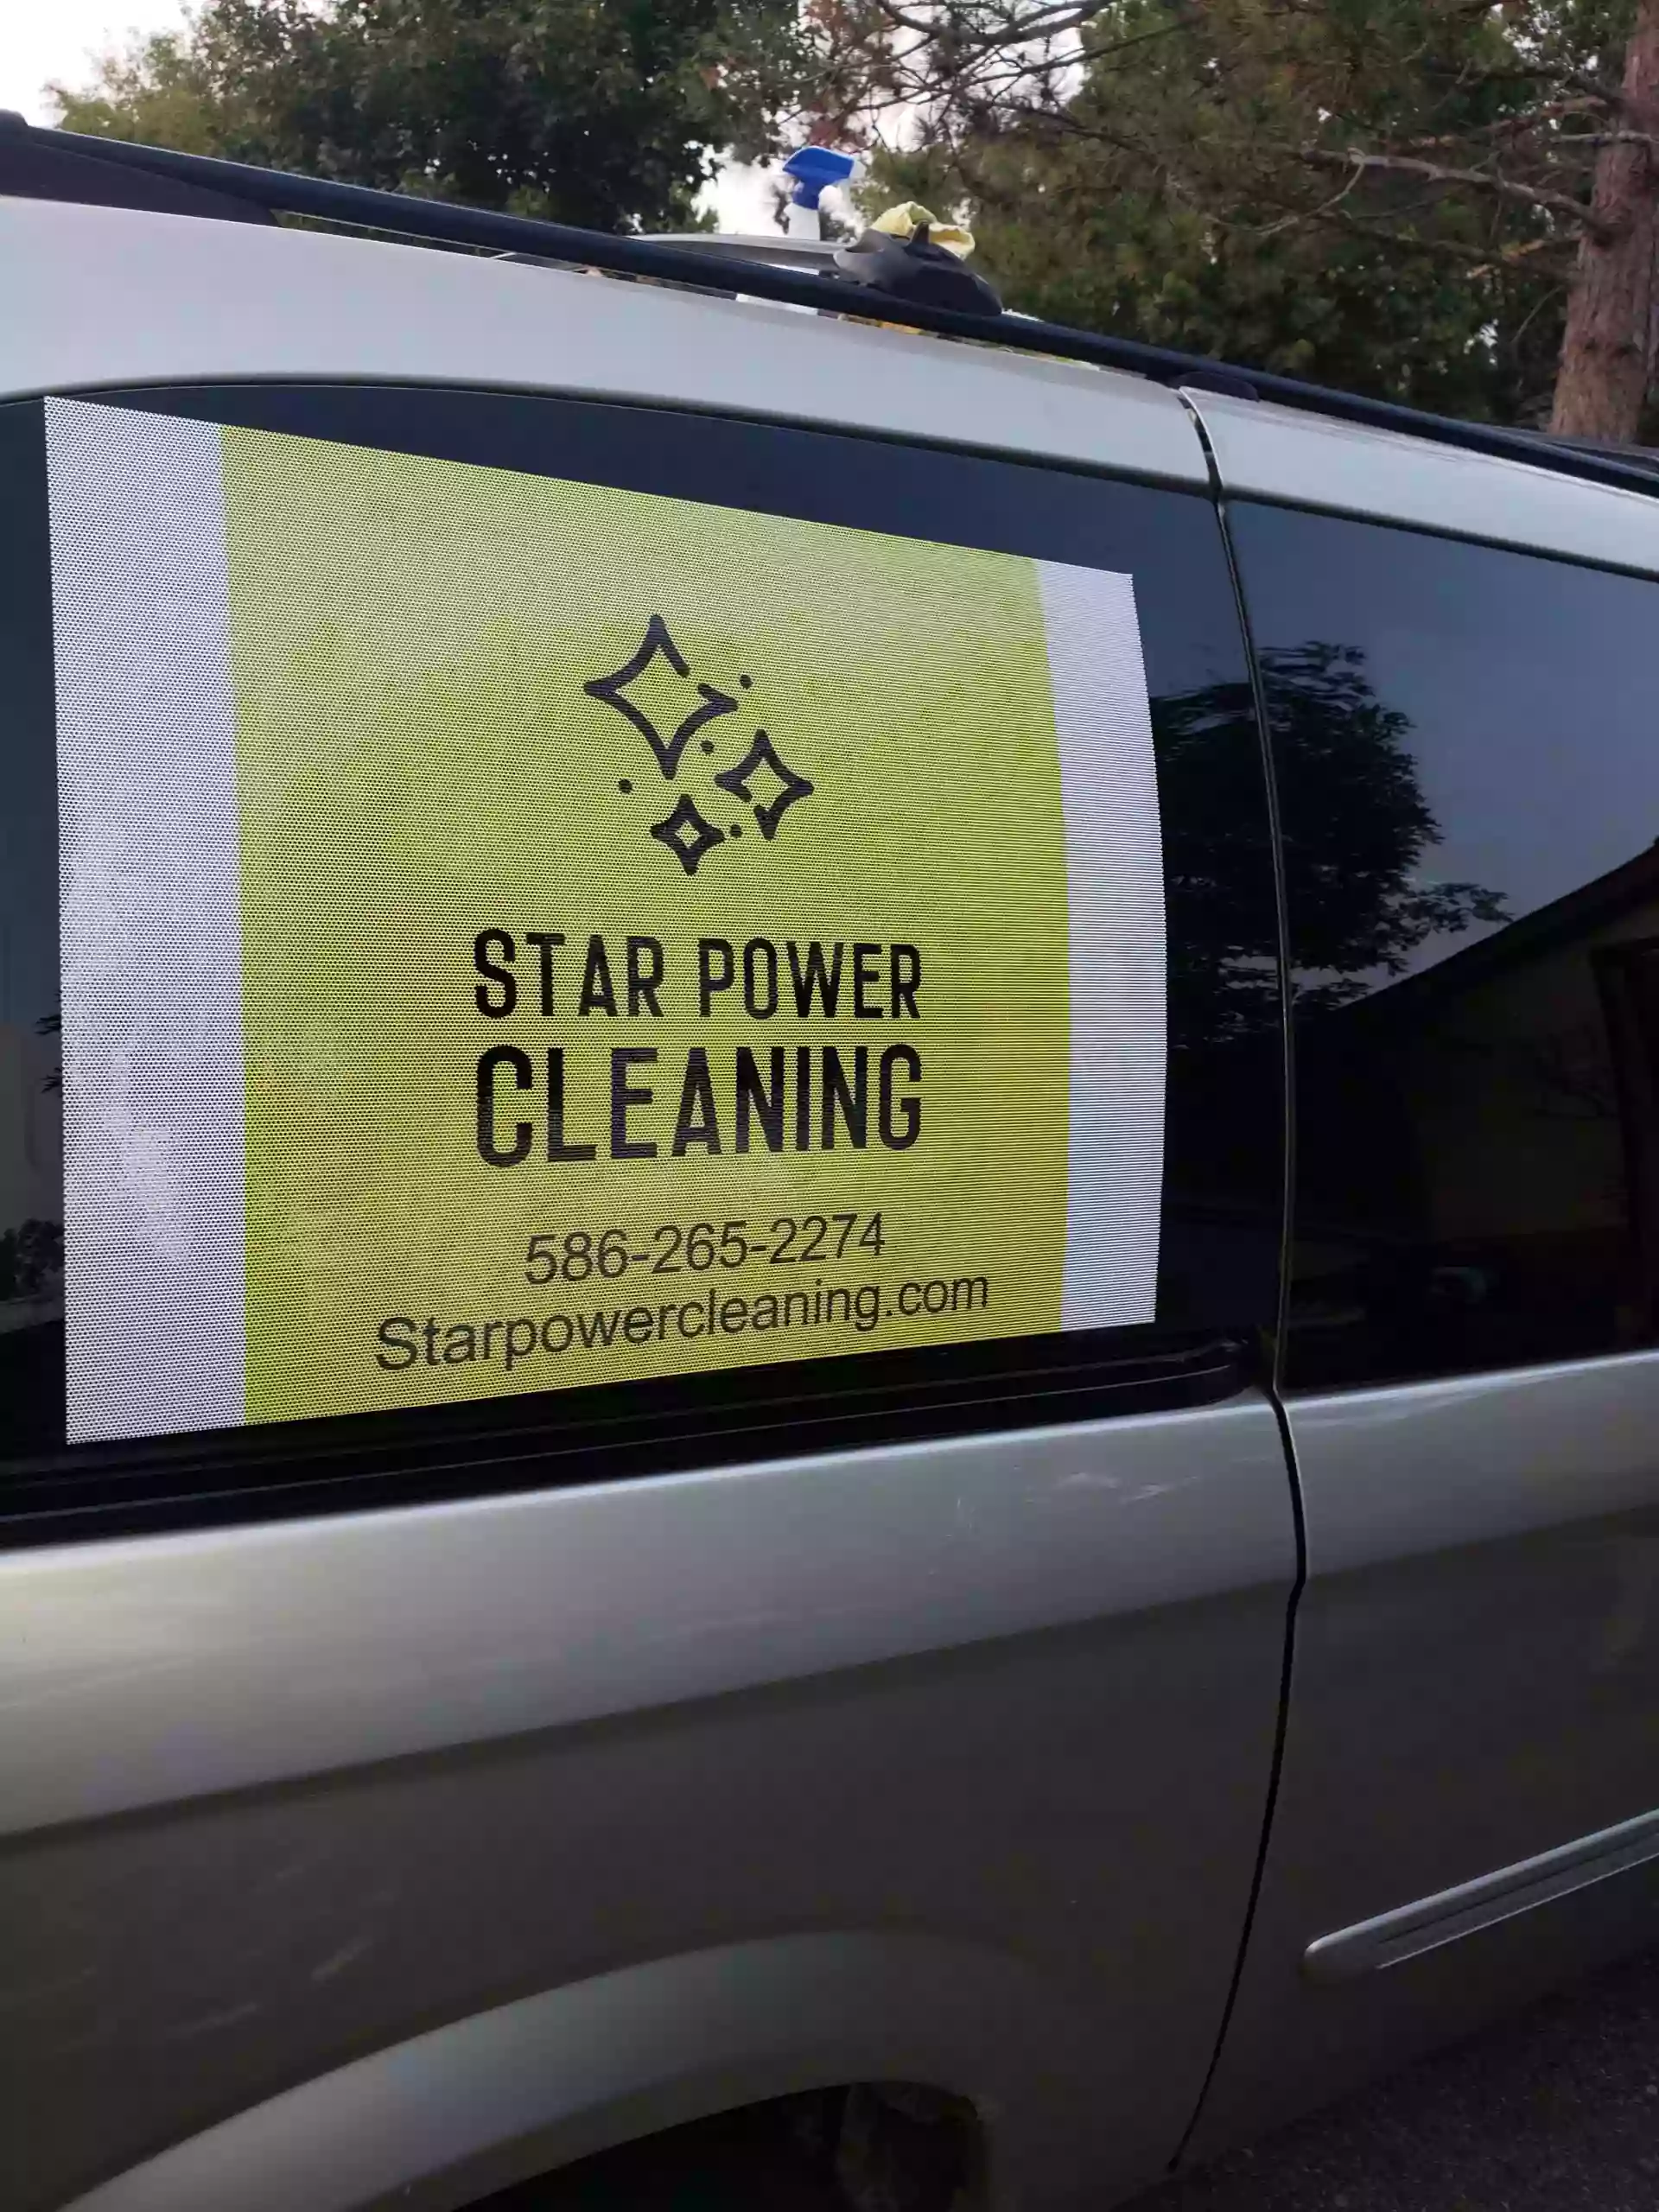 Star Power Cleaning Services